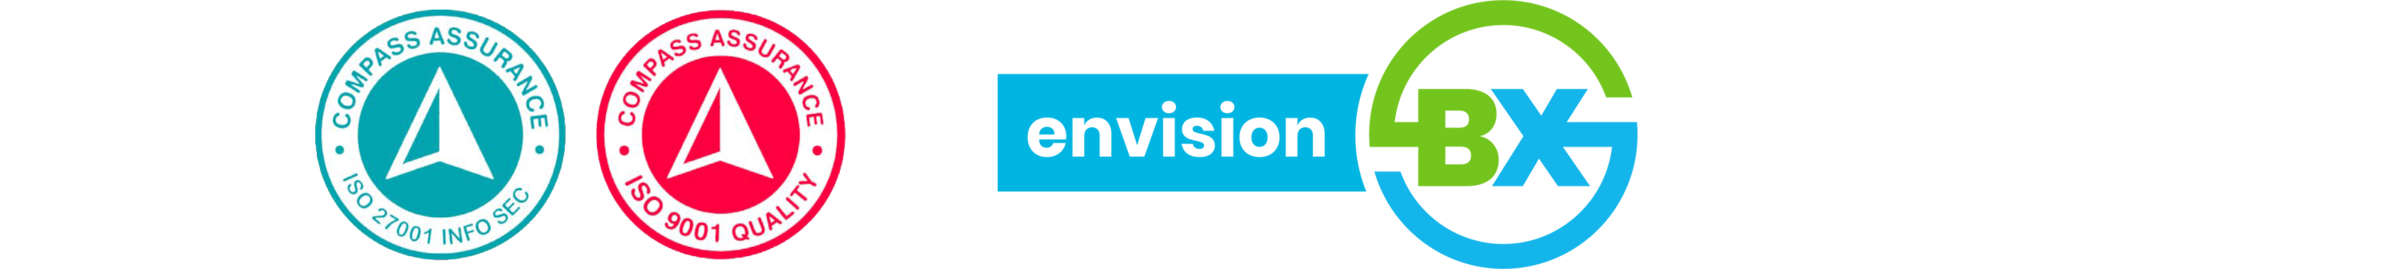 ISO logos and Envision BX logo